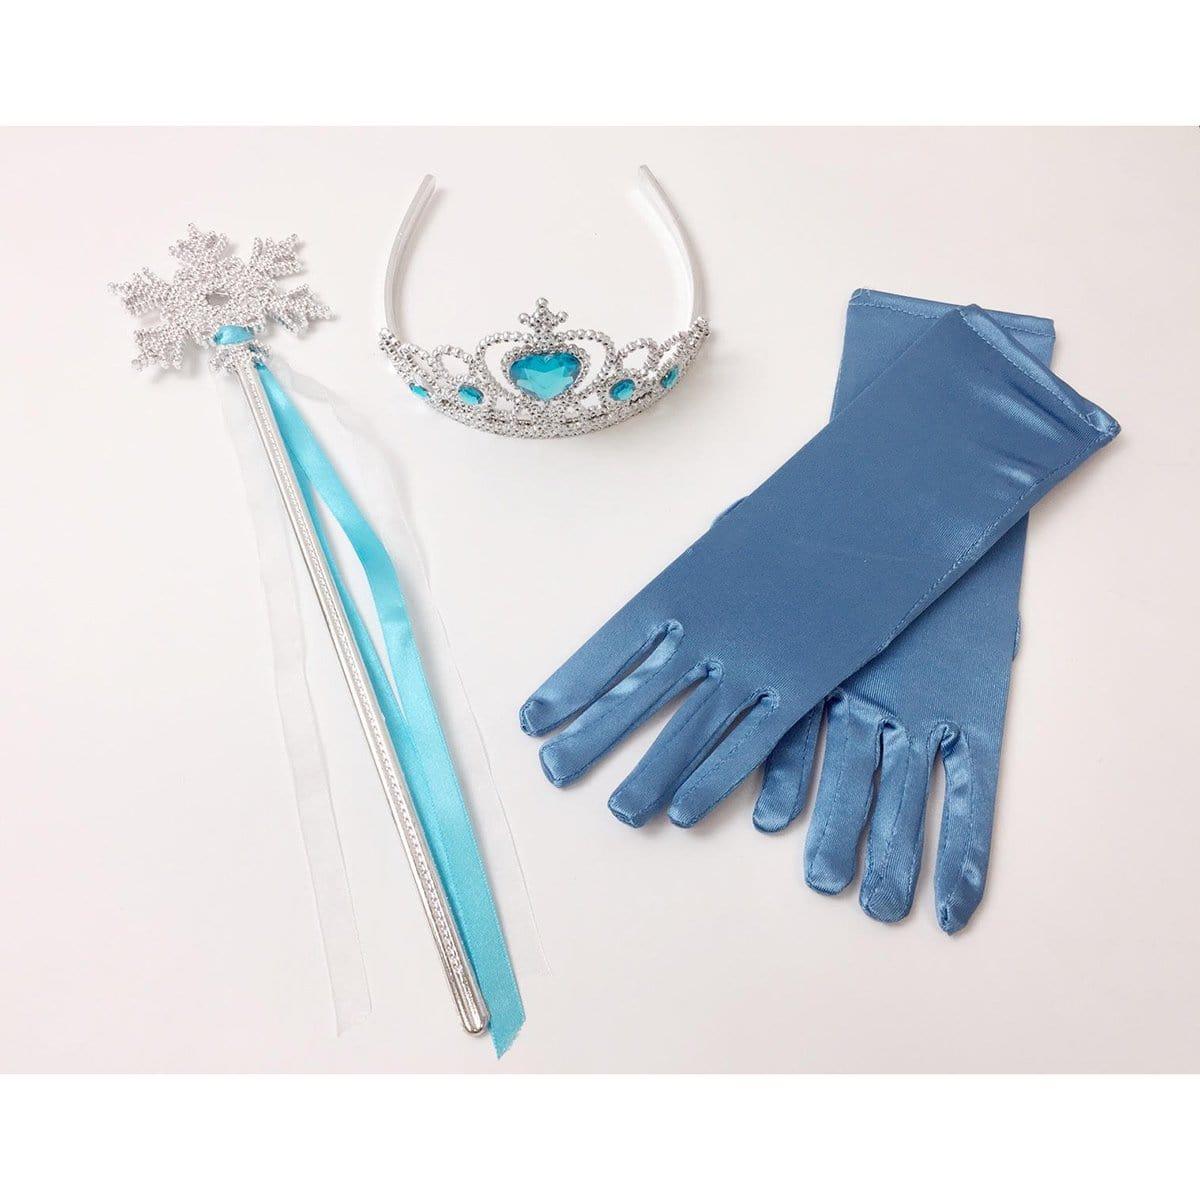 Buy Costume Accessories Blue princess accessory kit for girls sold at Party Expert